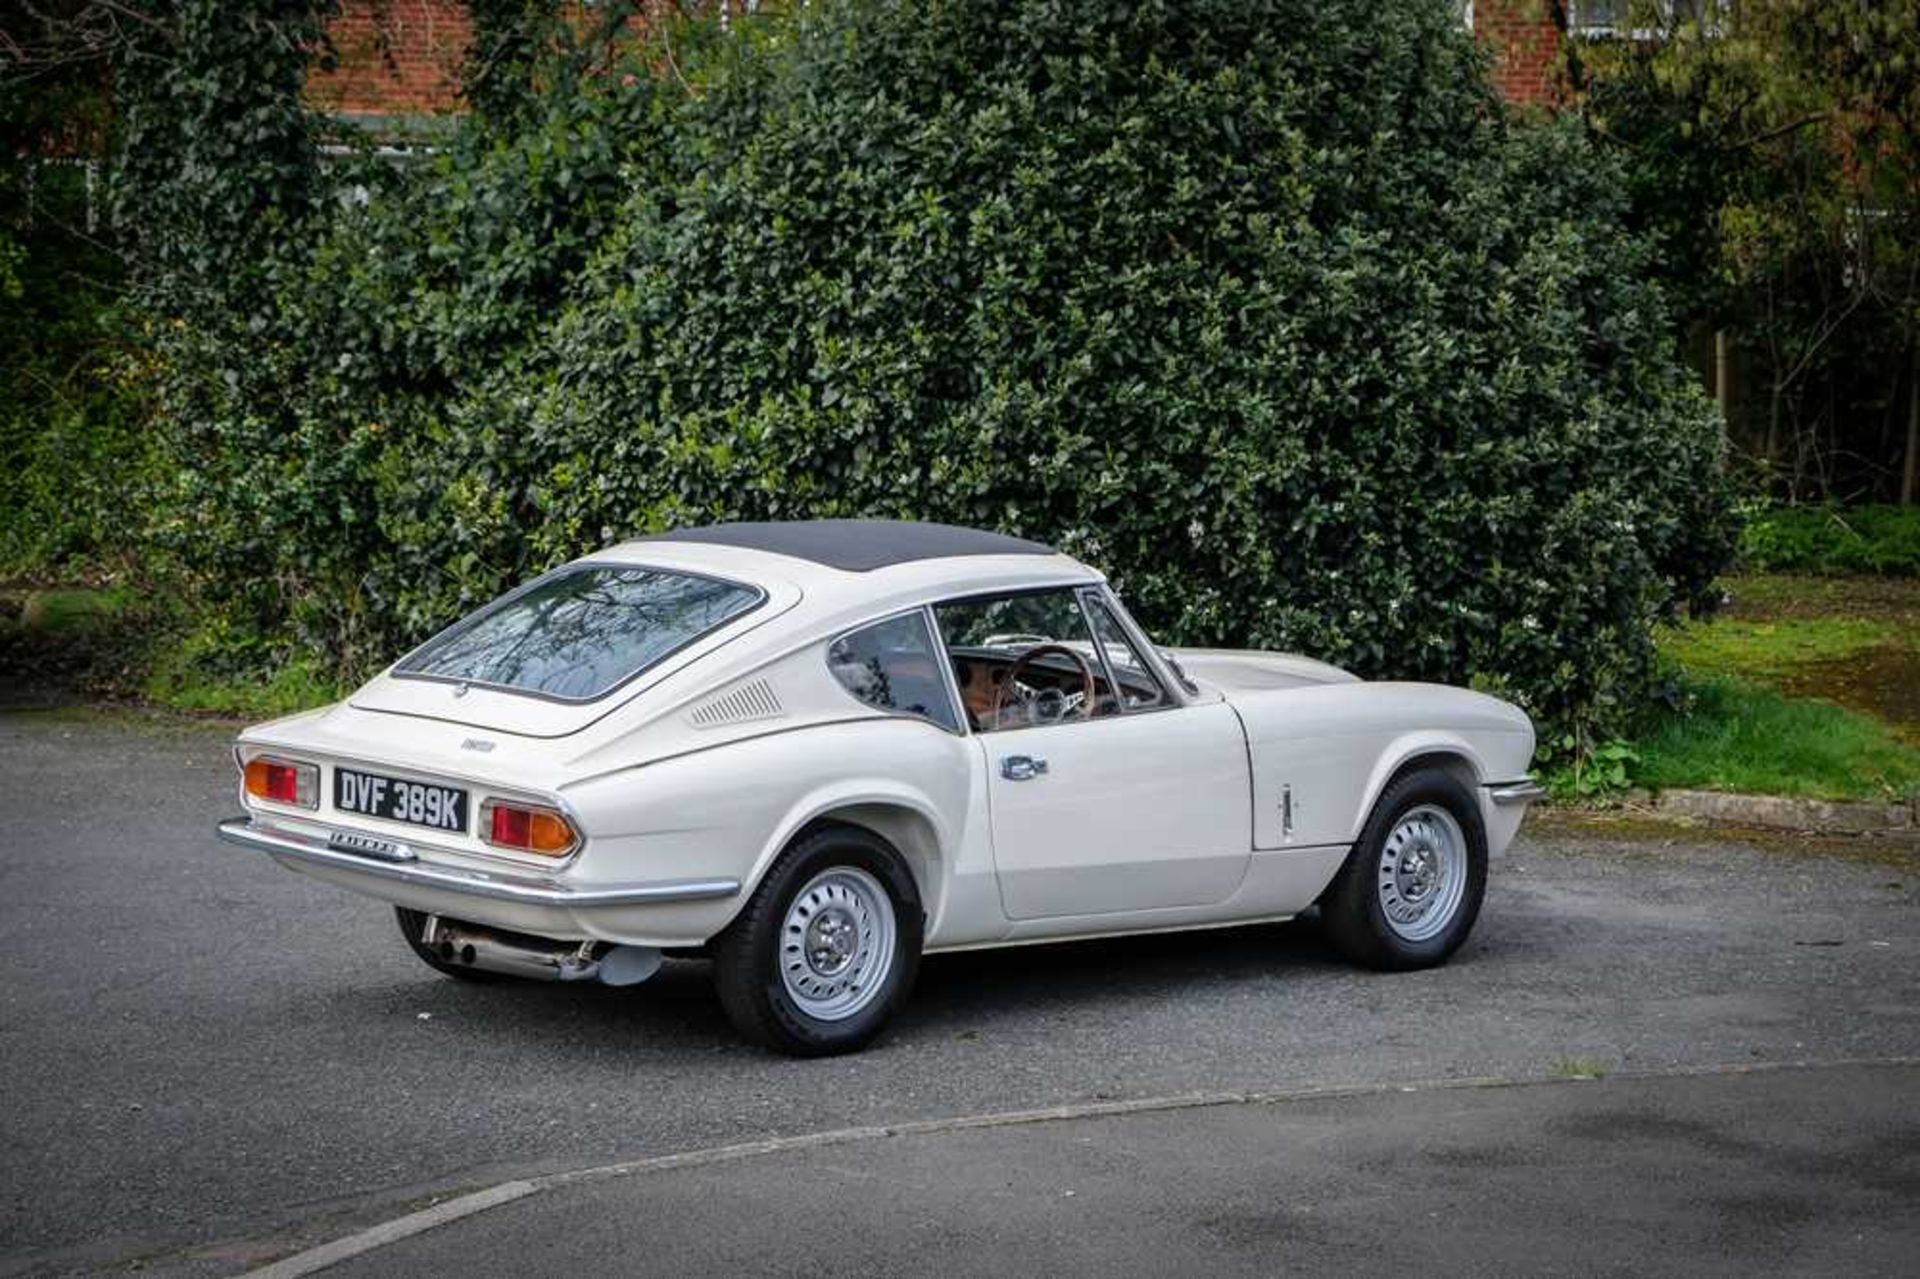 1971 Triumph GT6 MkIII Fresh from a full professional restoration - Image 24 of 106